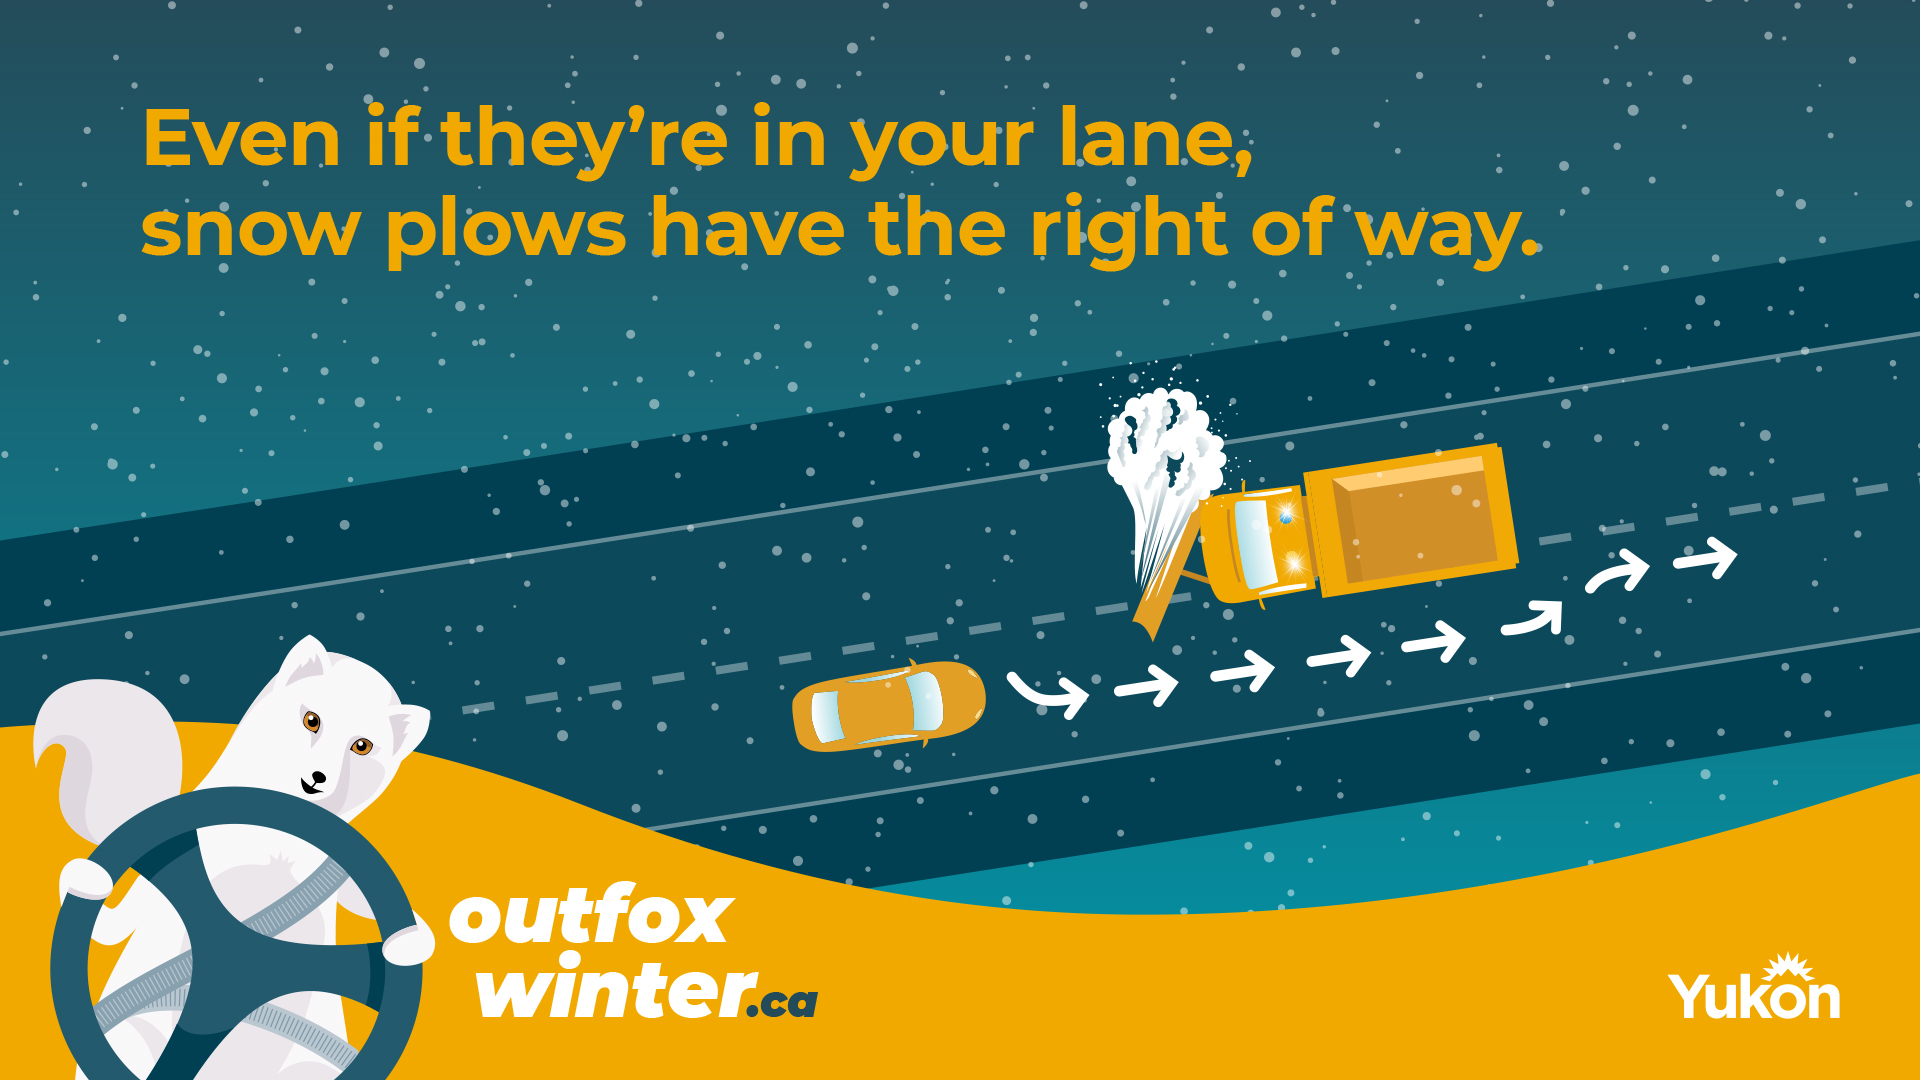 Snow plows have the right of way, even if they're in your lane